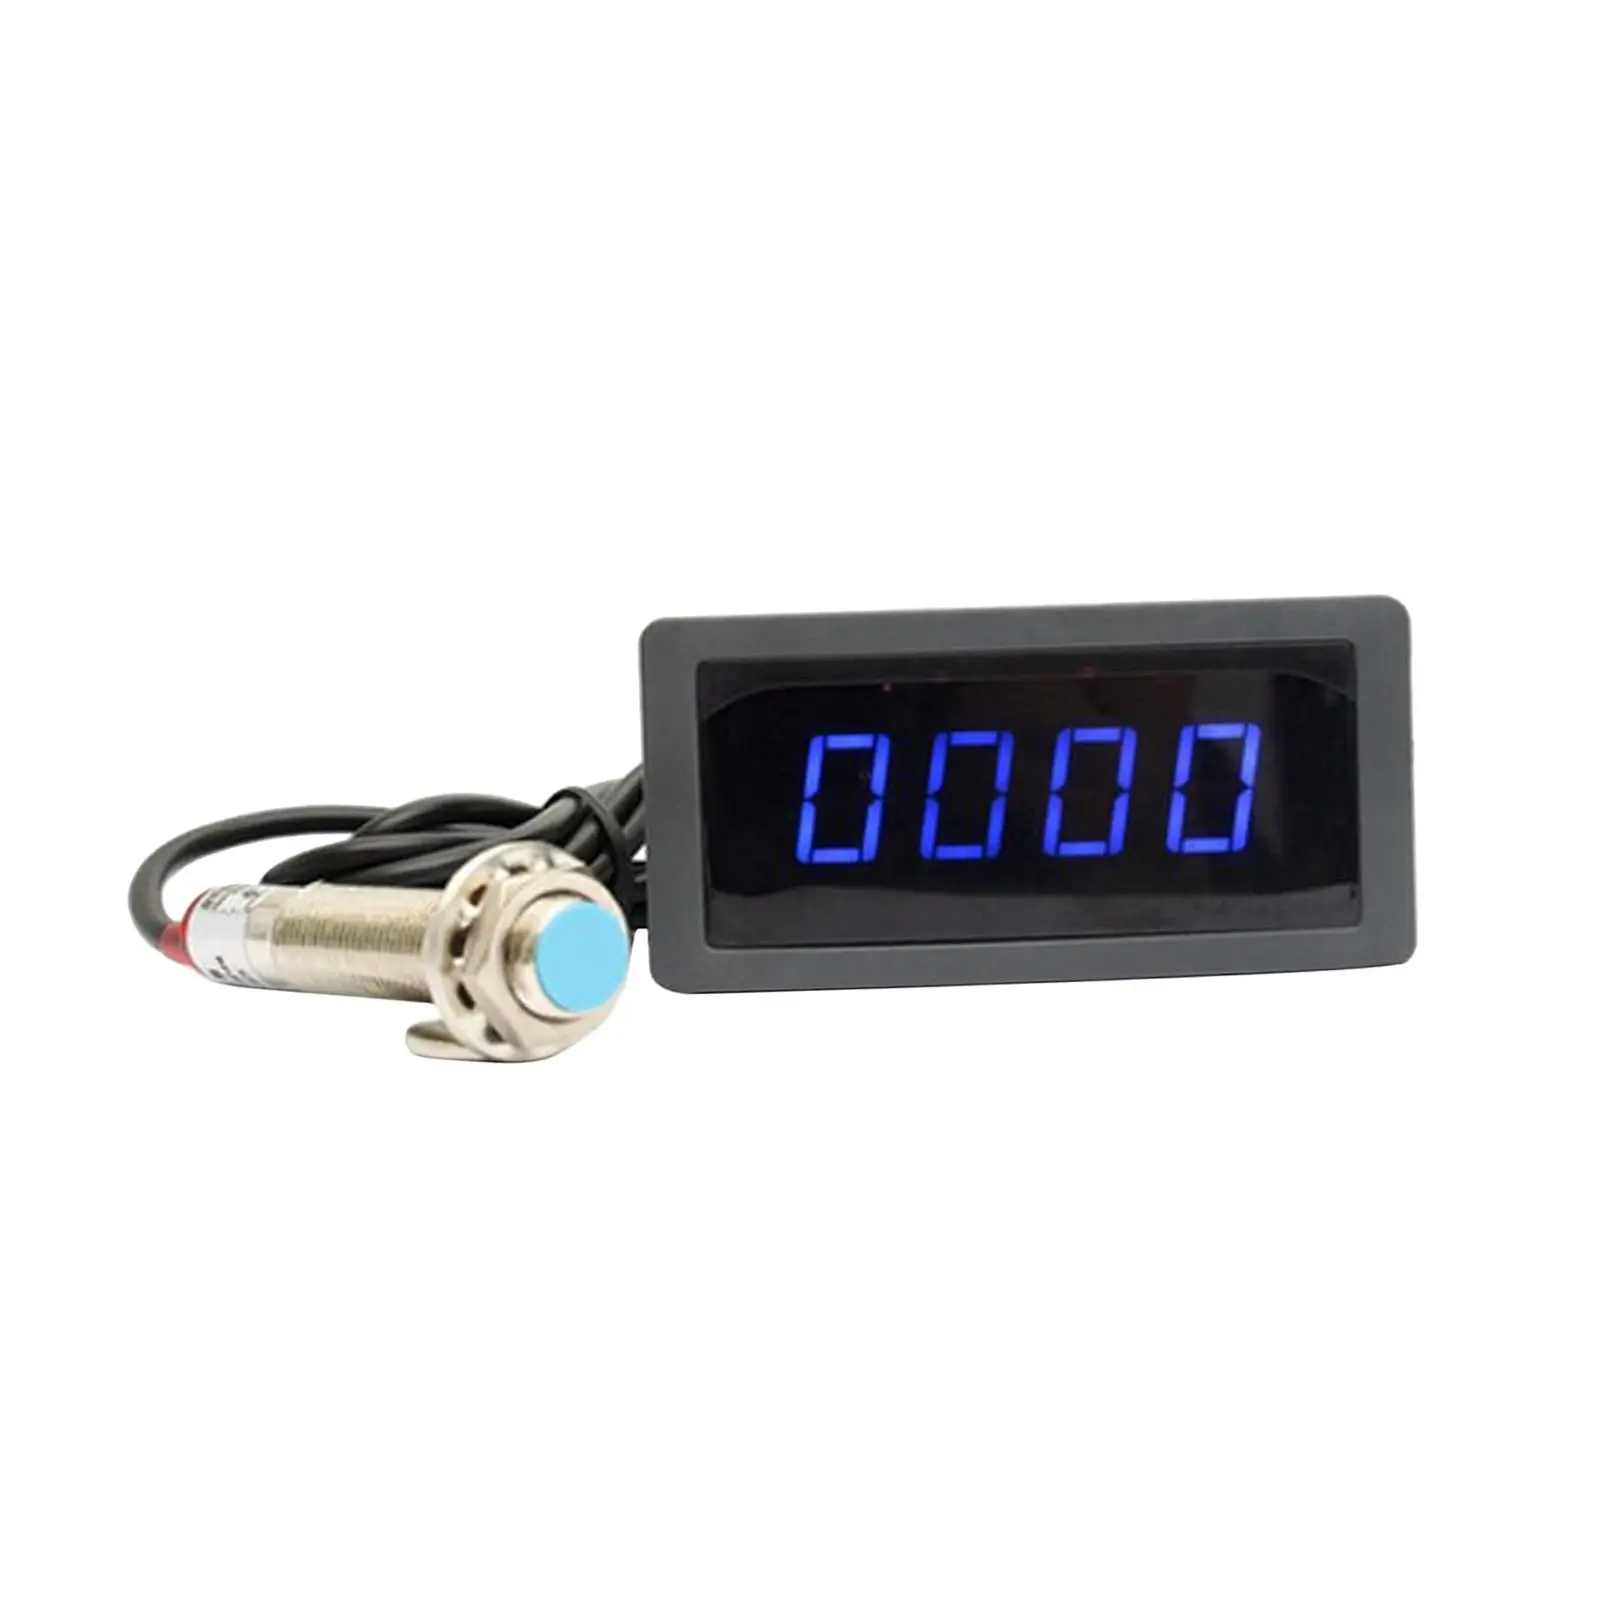 Tachometer Digital Tach Meter for Engine  Motocycle Outboards Snowmobile Marine Boat